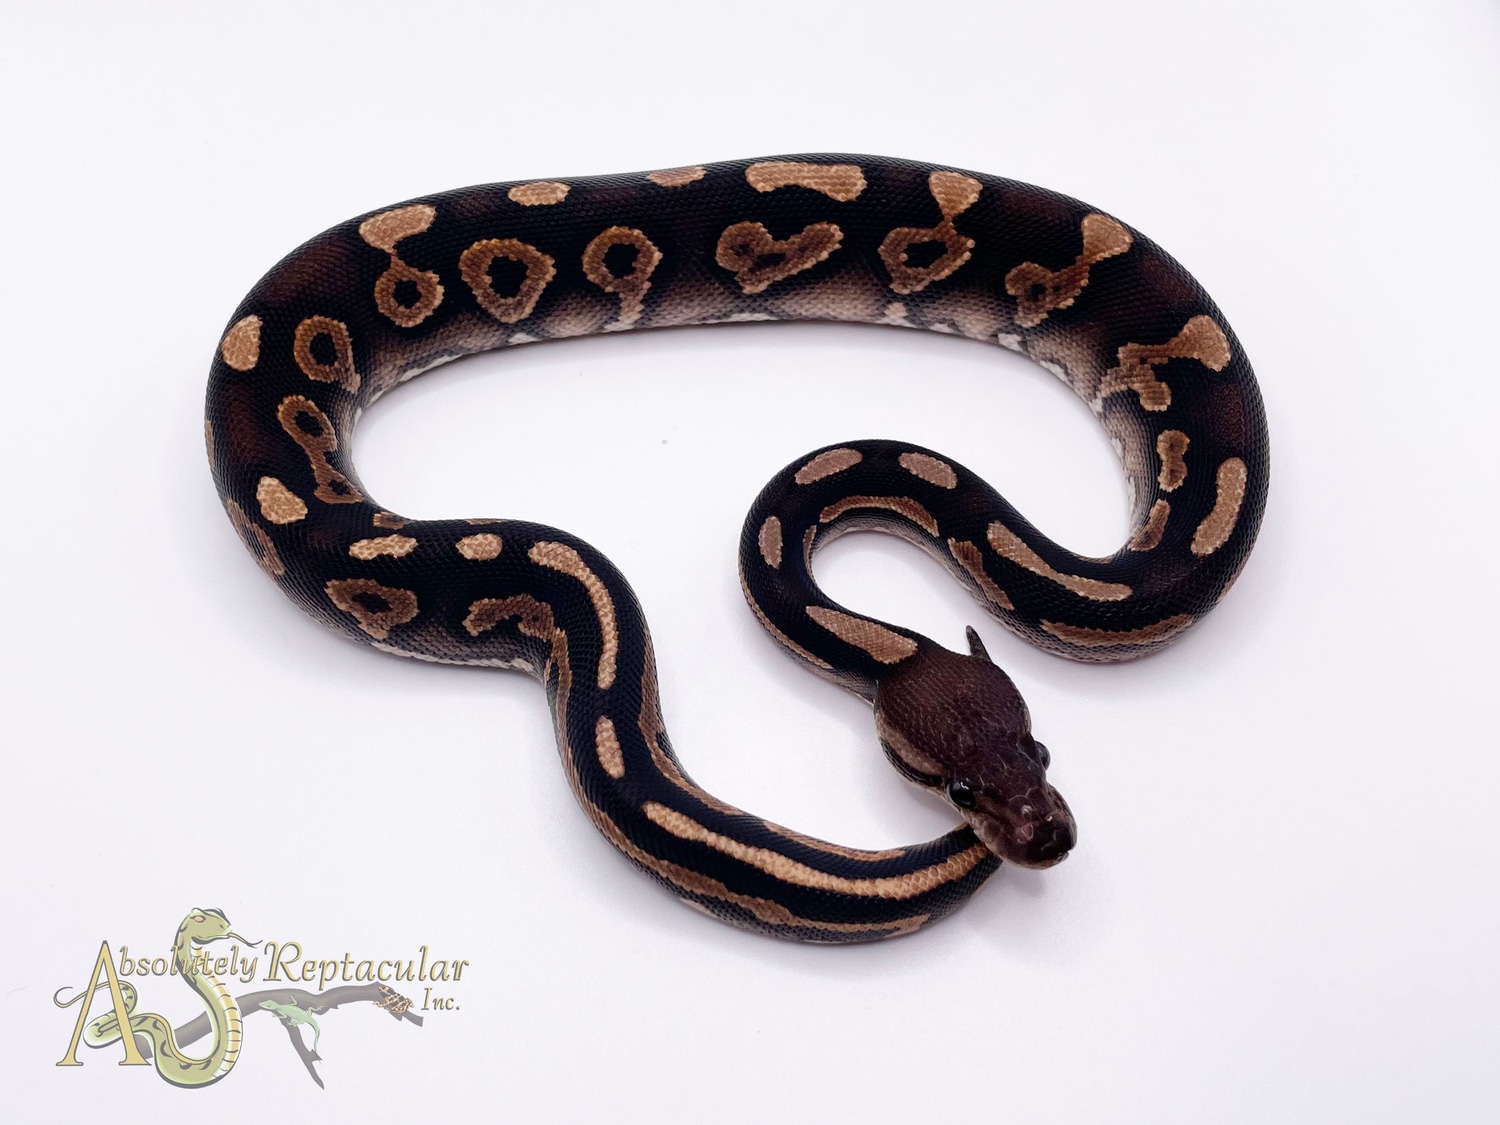 Cinnamon Surge Ball Python by Absolutely Reptacular